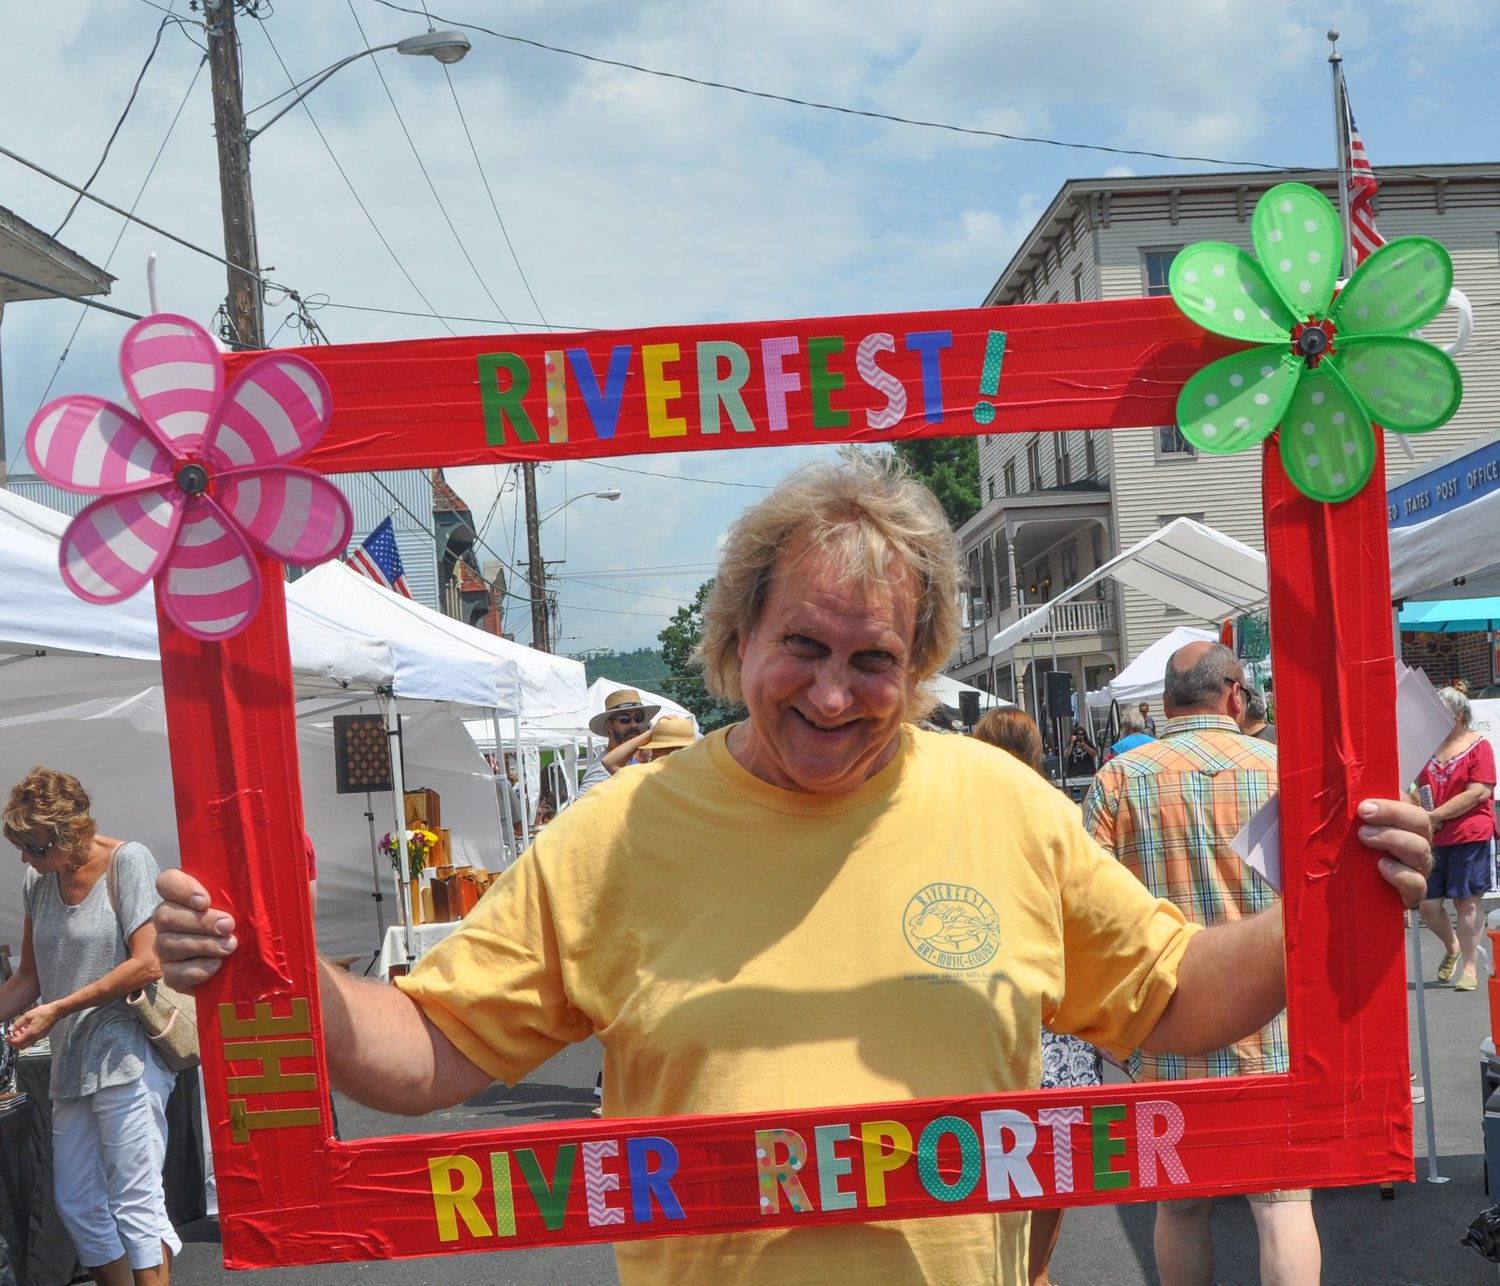 Street festivals, concerts under the stars, plays, parades and farmers’ markets await, so be sure to check out the River Reporter calendar of events weekly to keep up, keep track and keep busy throughout the summer.